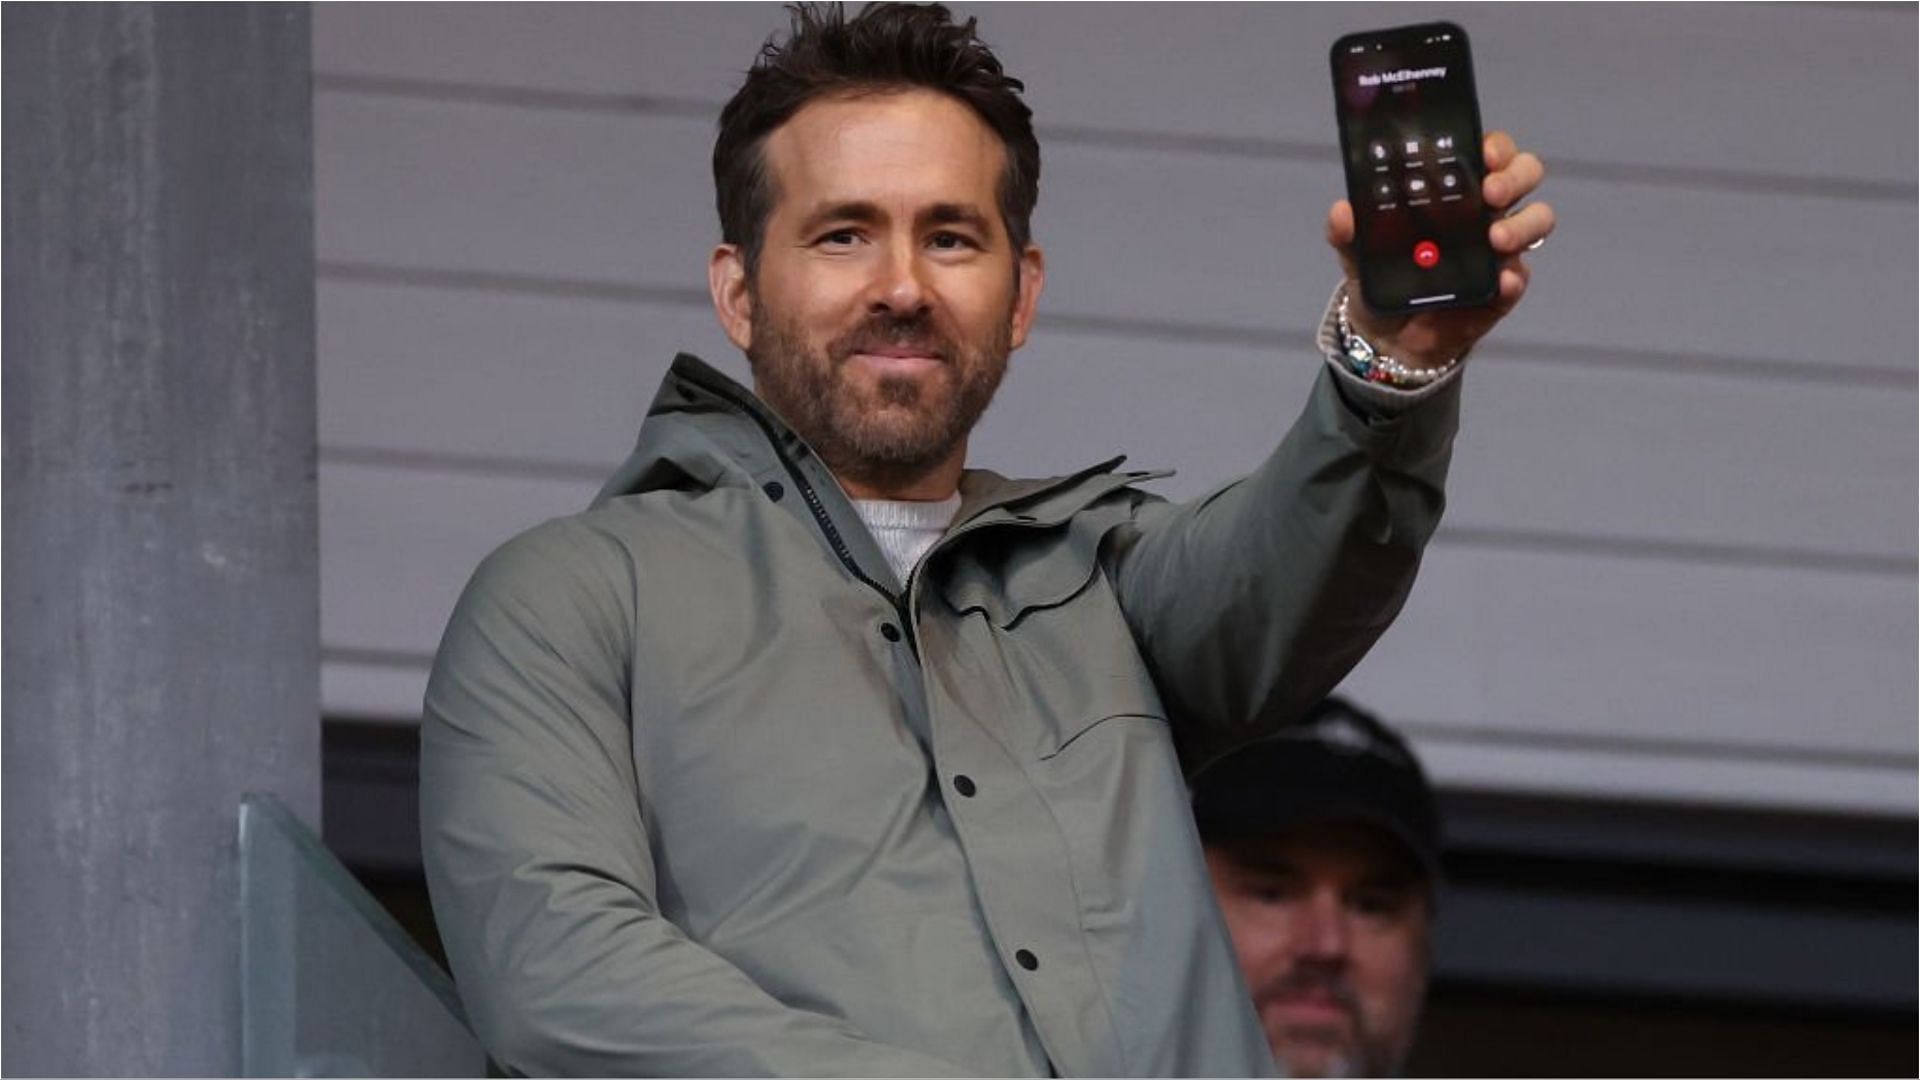 T-Mobile recently purchased Ryan Reynolds